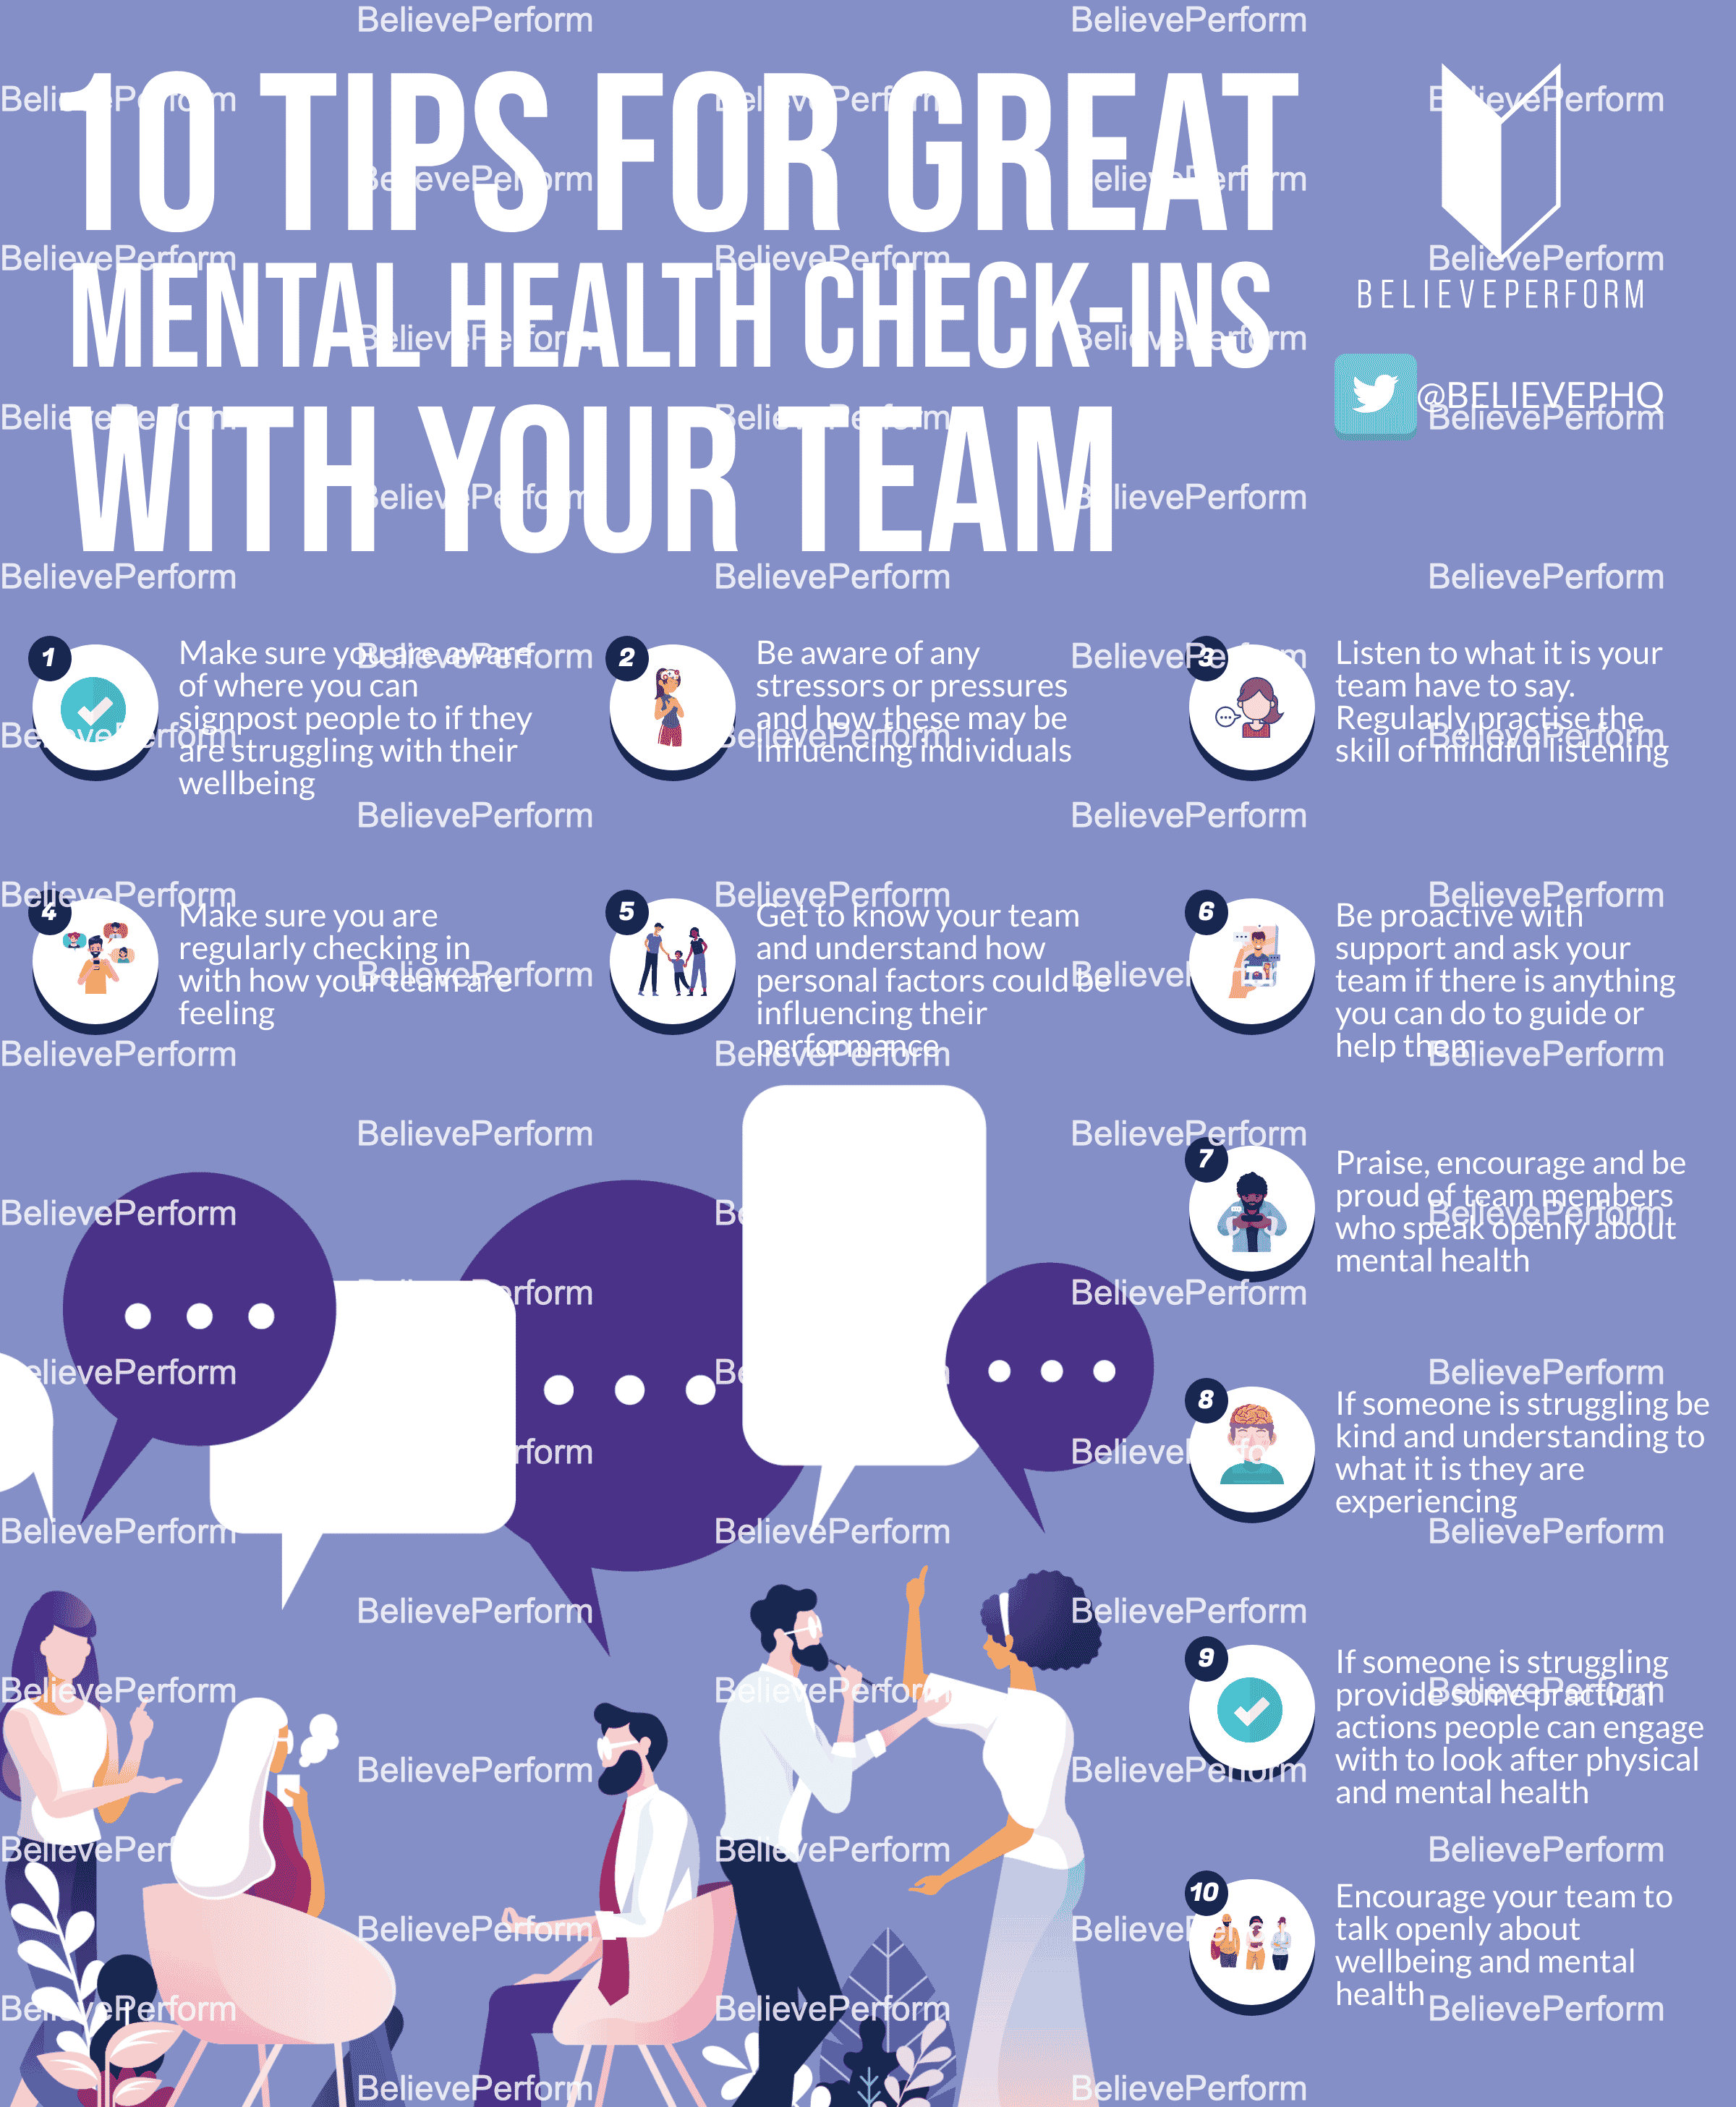 10 tips for great mental health check